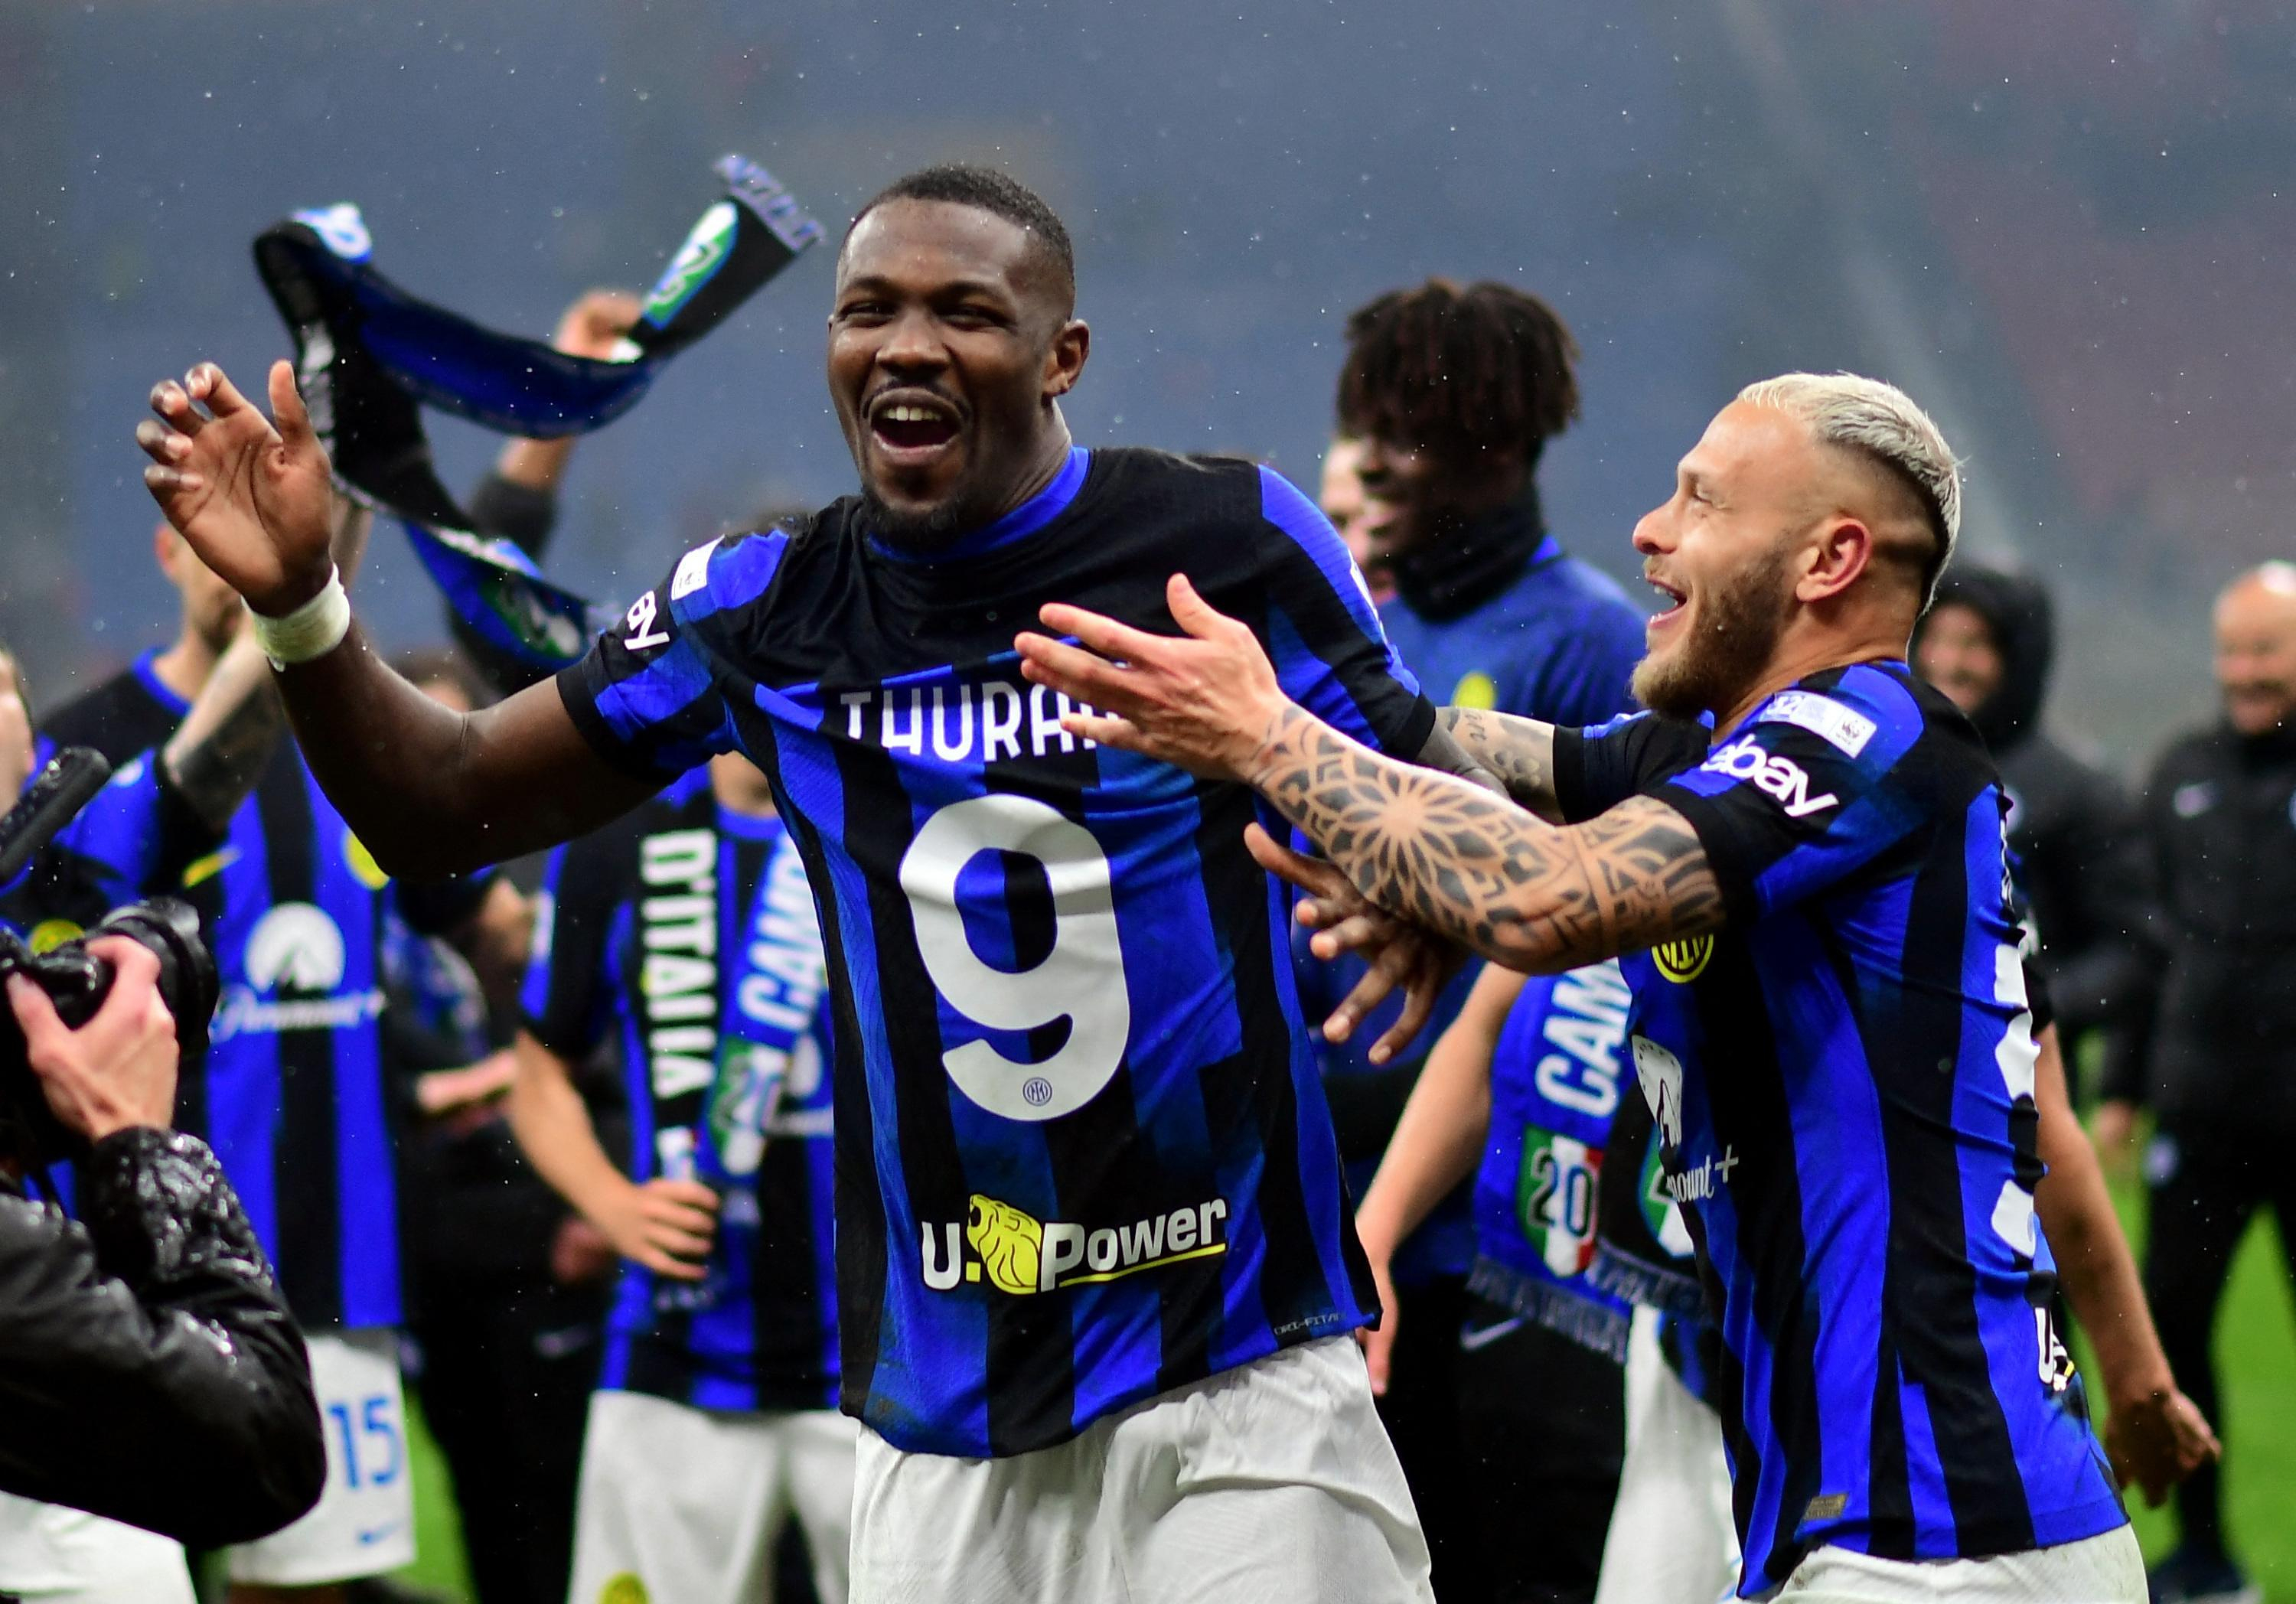 Inter Italian champion: “Very proud of my first title”, relishes Thuram